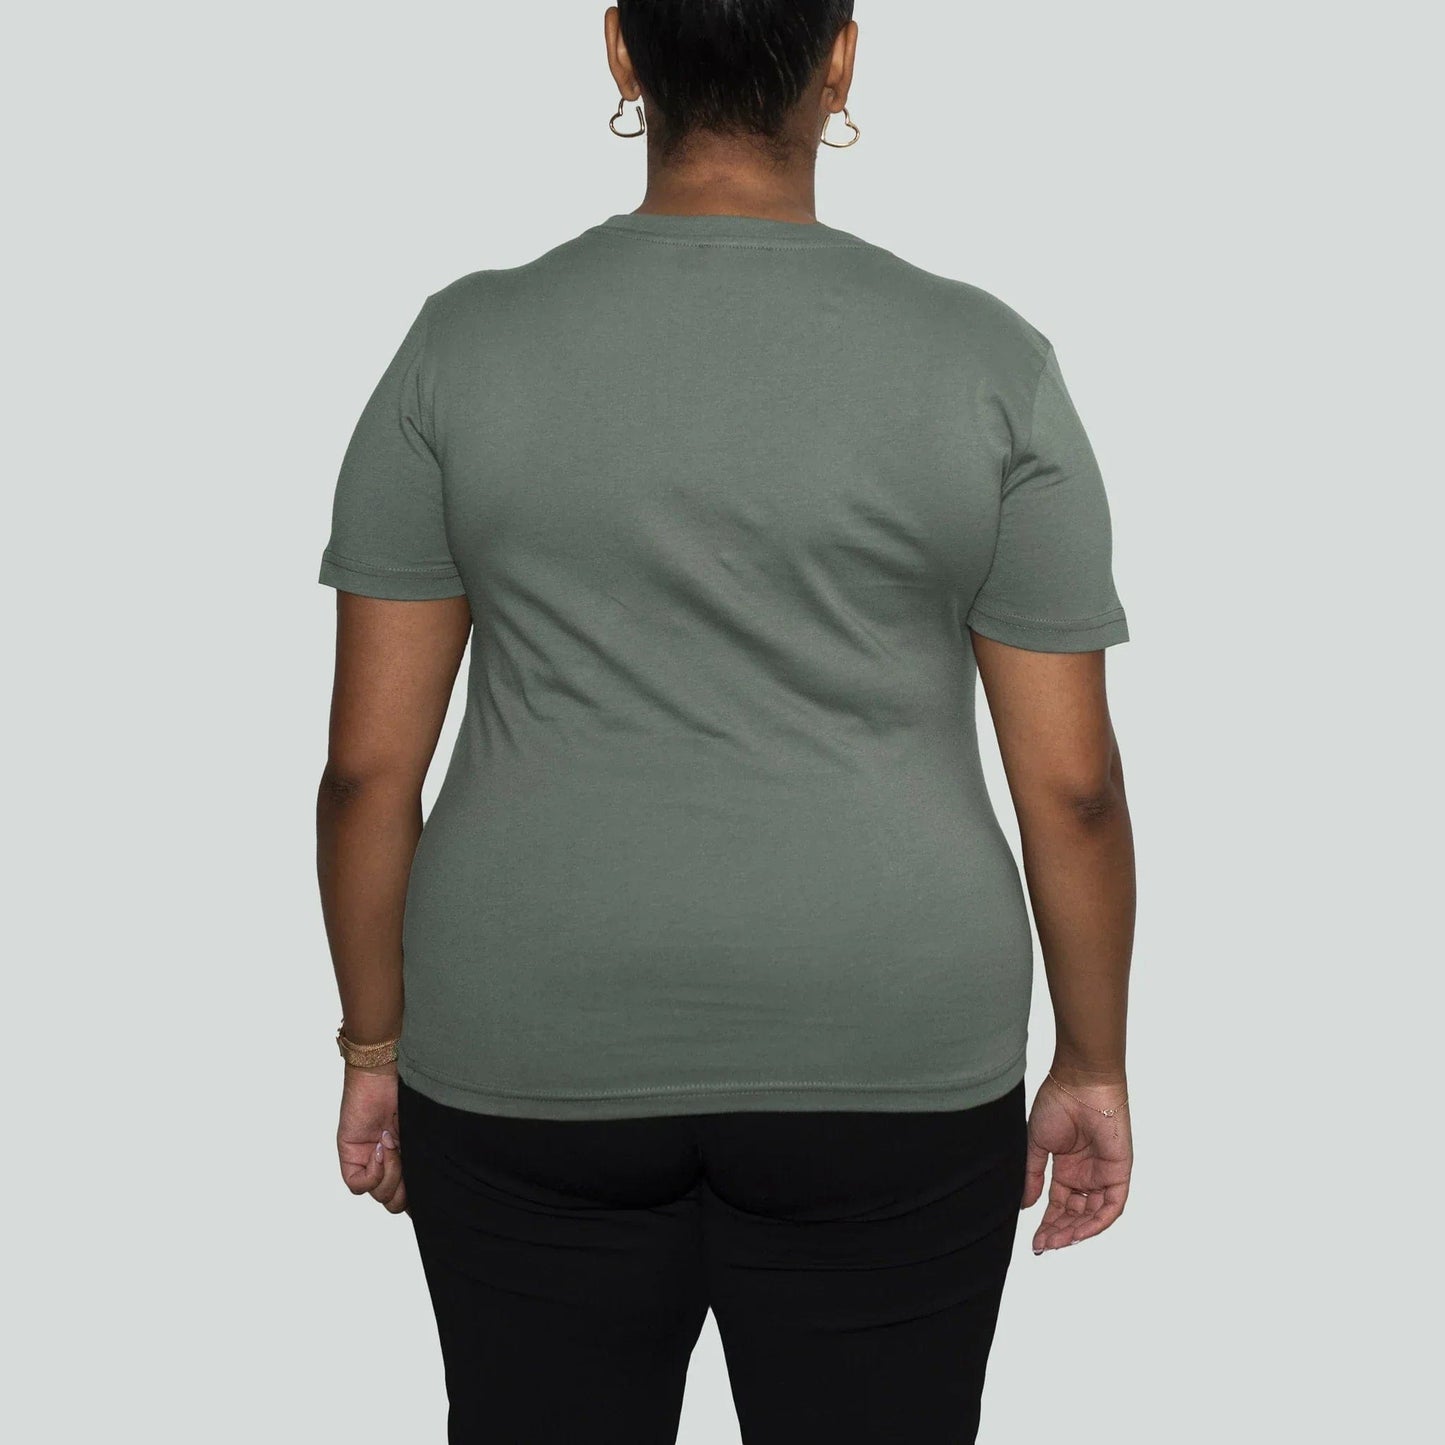 3 Pack | Women’s T-Shirts, Recycled Cotton, Sage